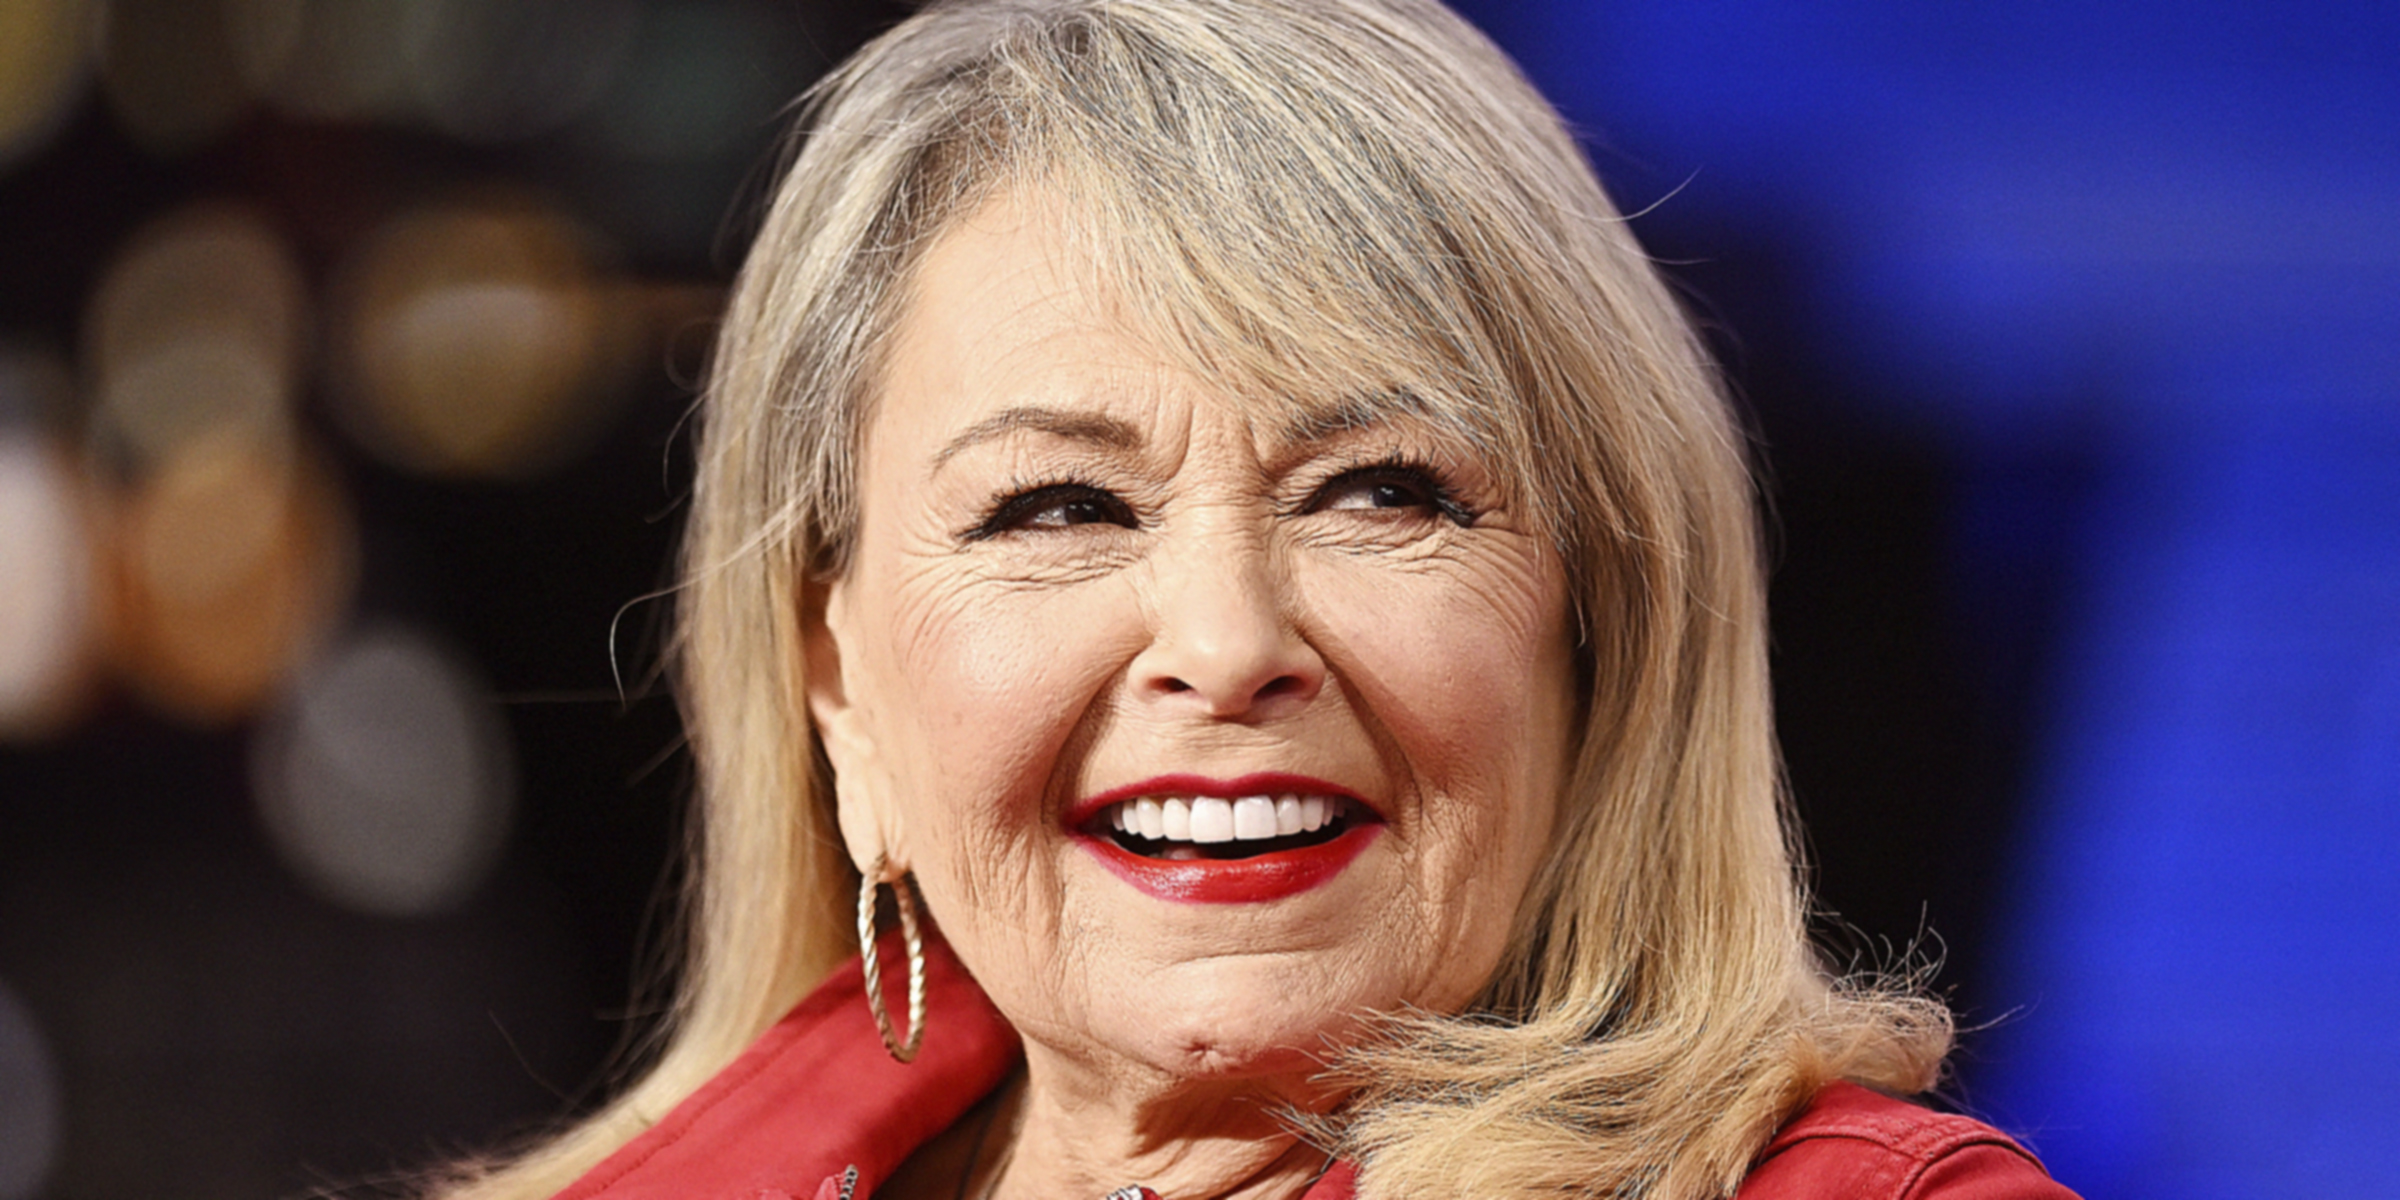 Roseanne Barr | Source: Getty Images